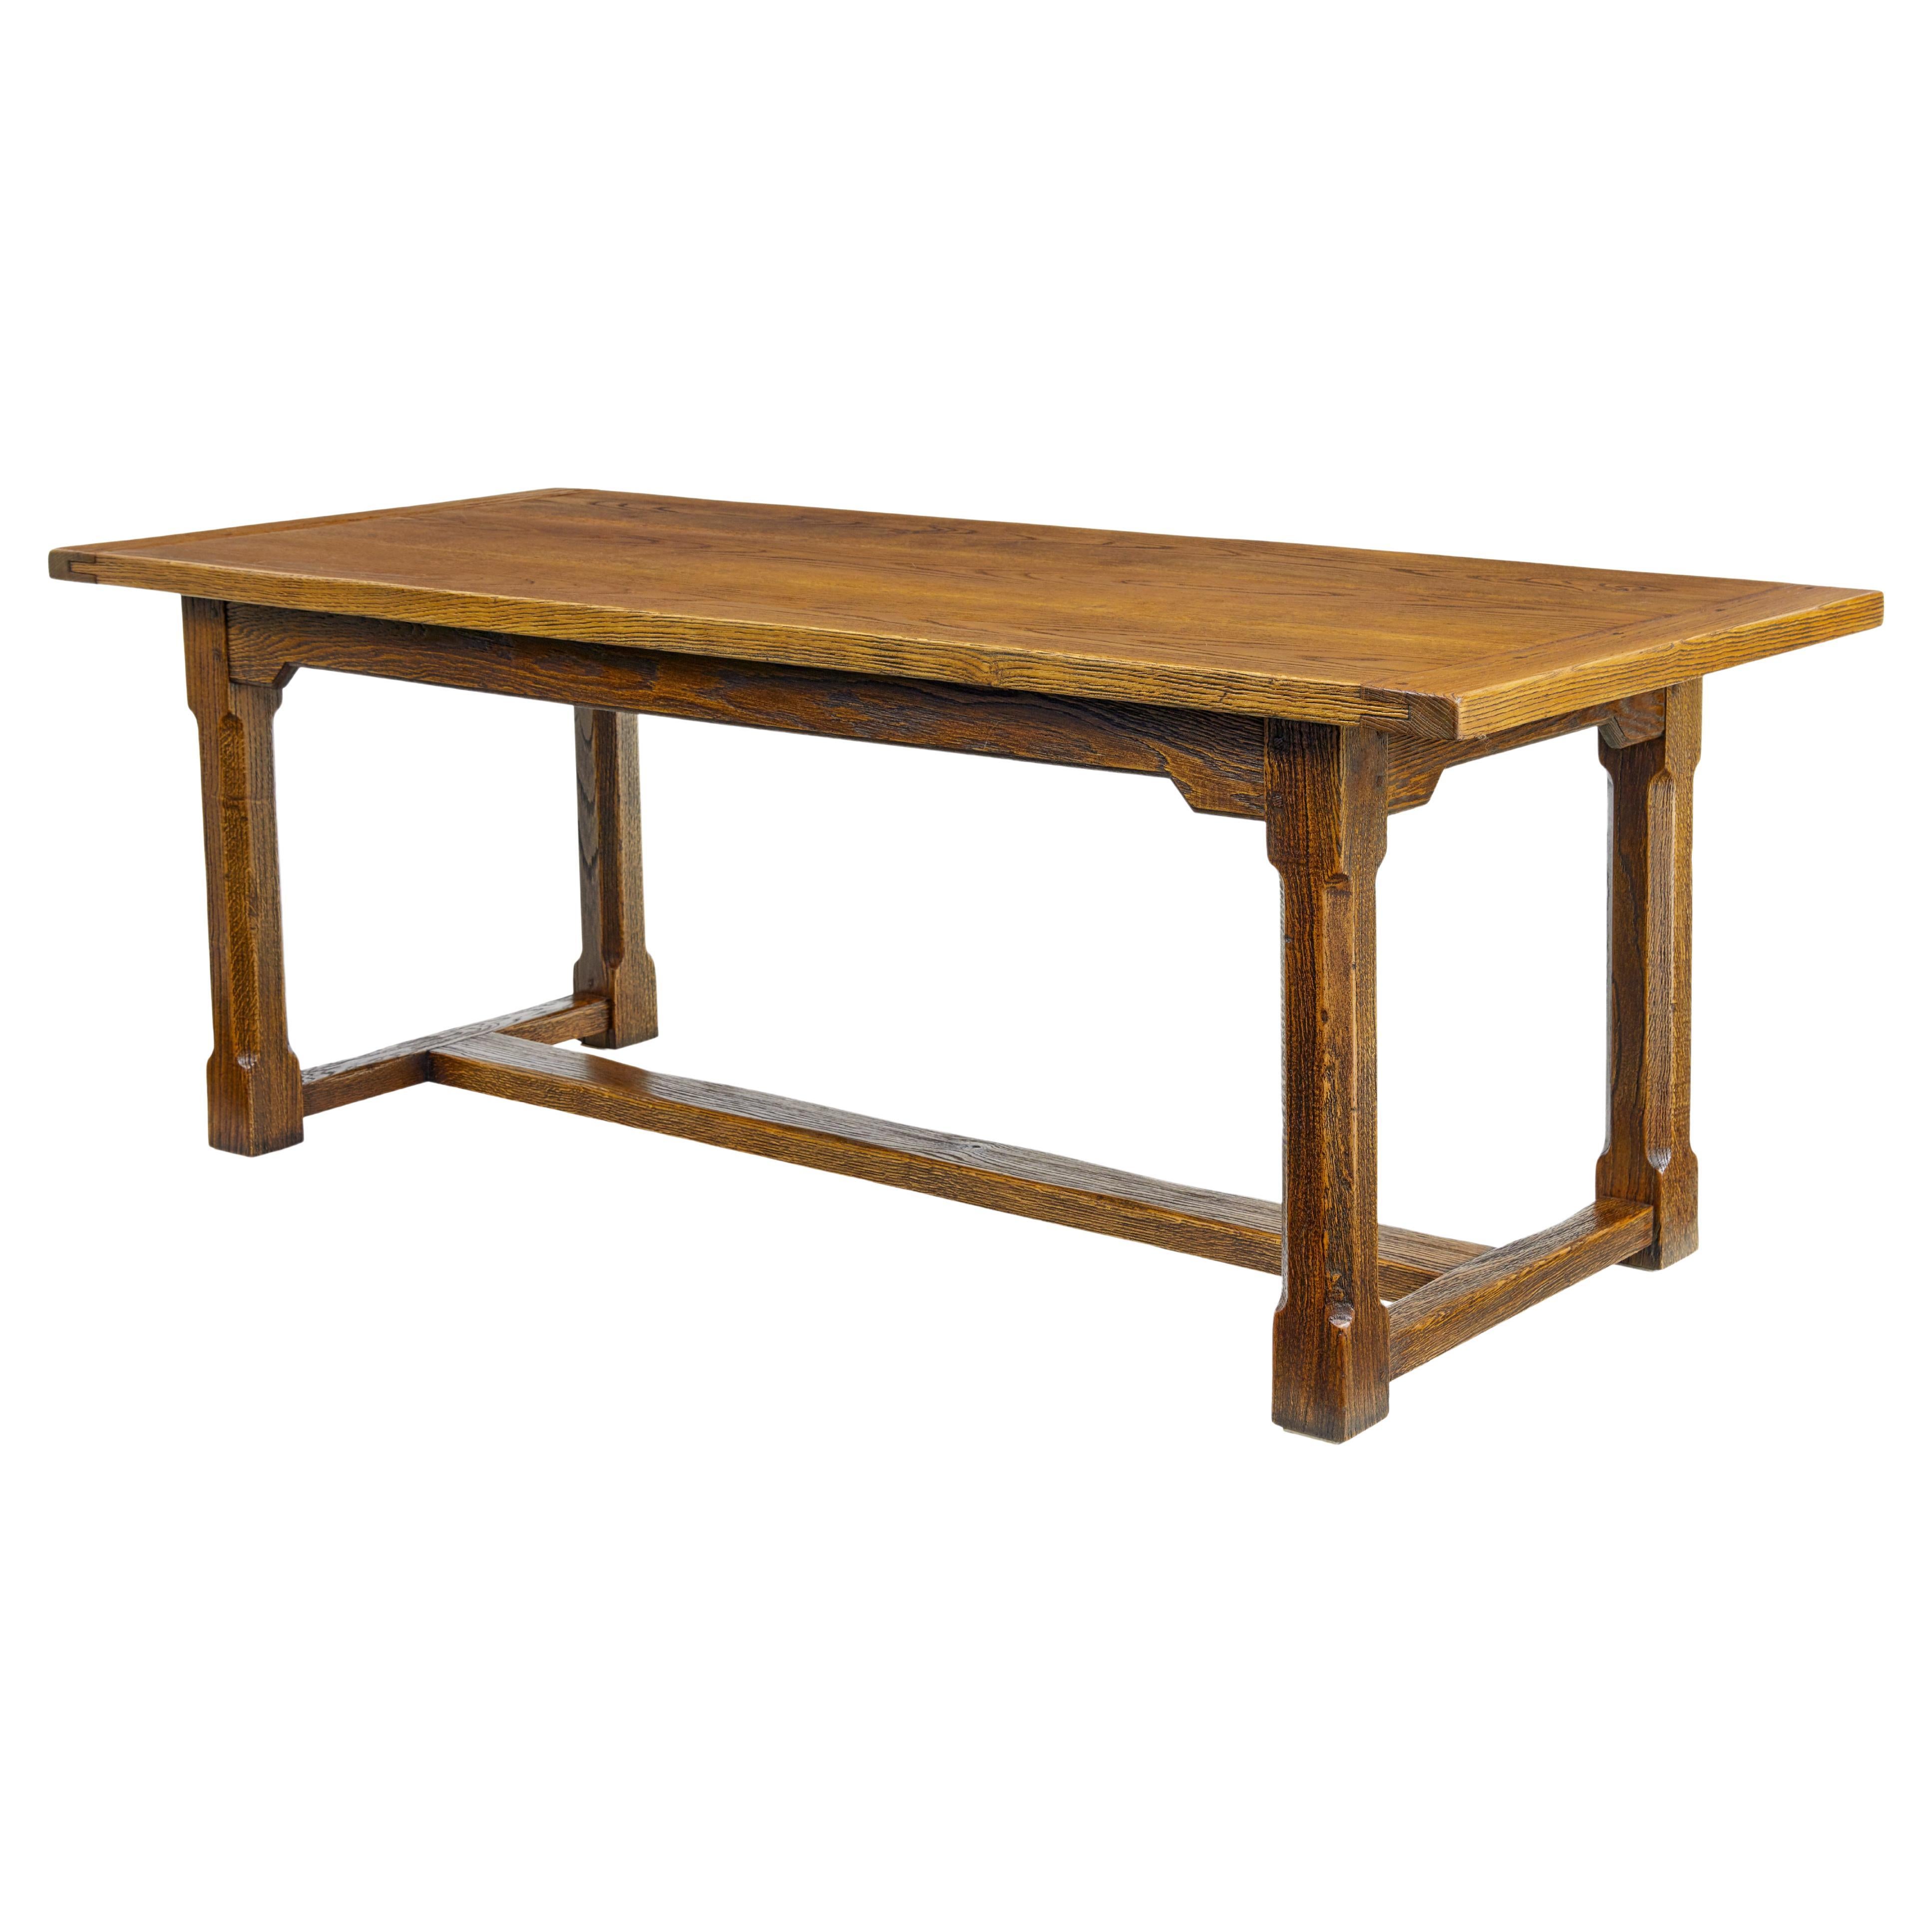 English made golden oak refectory dining table For Sale